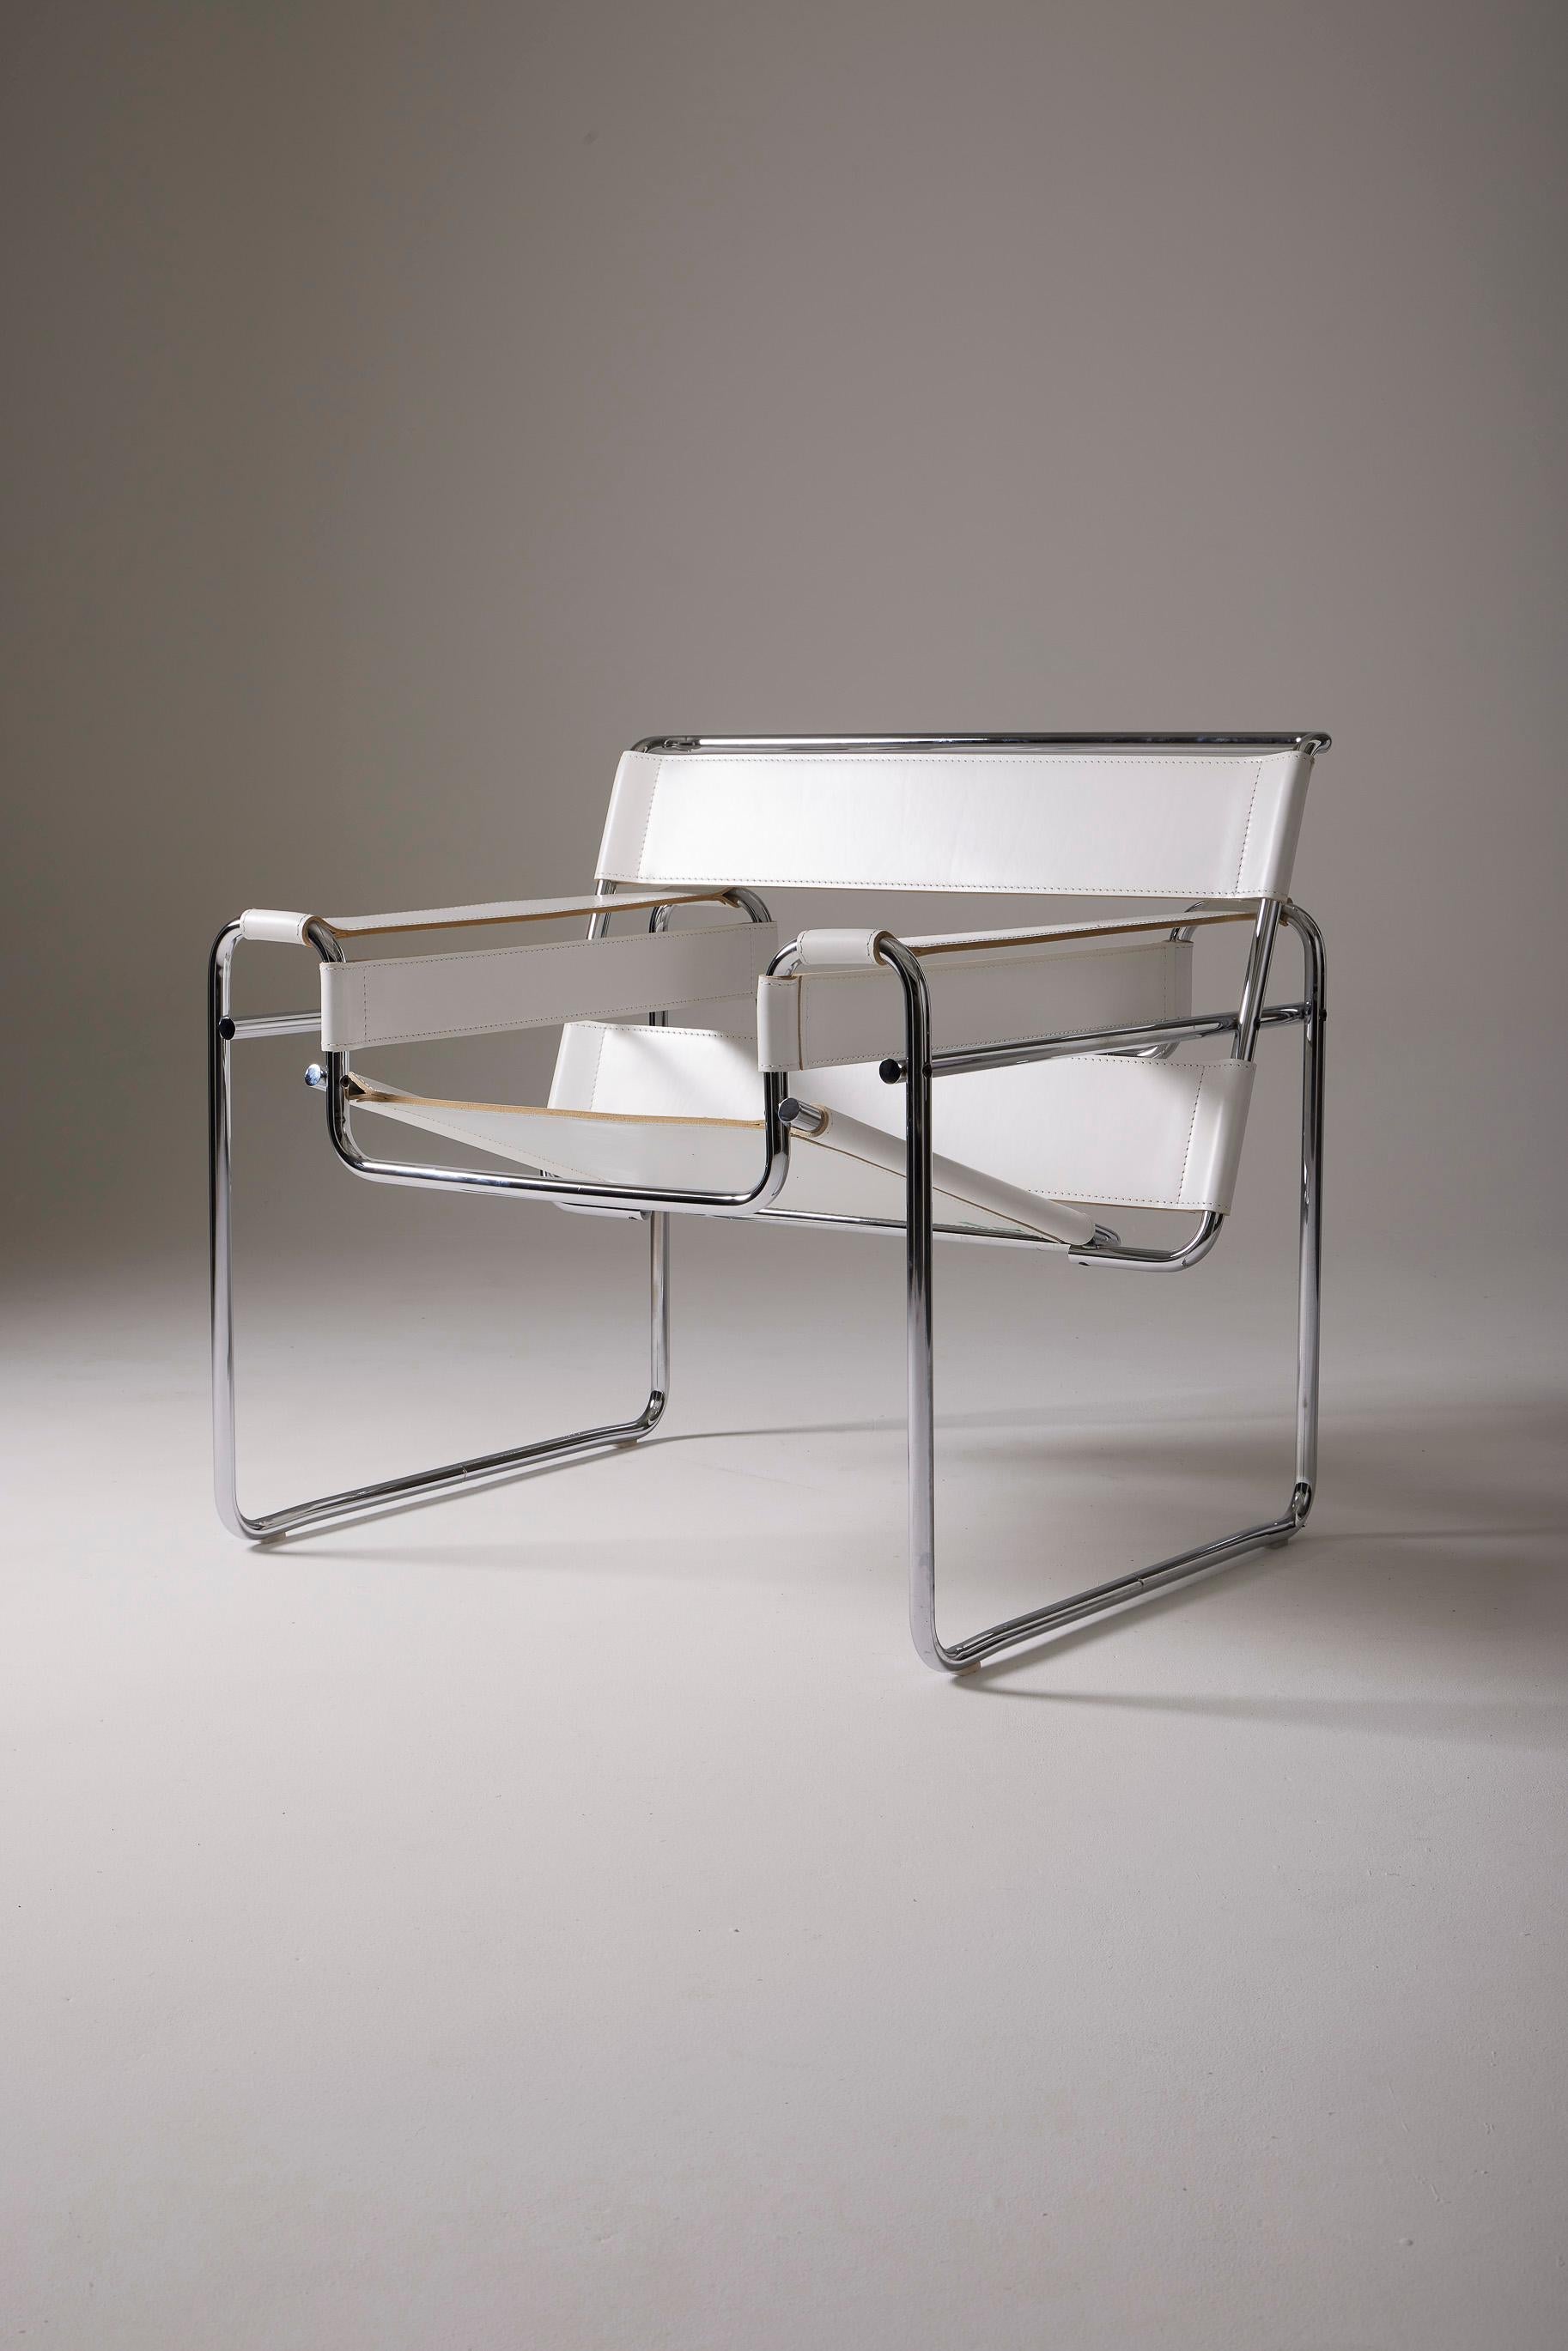 Iconic Wassily chair by designer Marcel Breuer for Knoll. He created this design in 1925 for the apartment of the painter Vassily Kandinsky while he was still a student at the Bauhaus. Its tubular structure, inspired by that of a bicycle, is made of